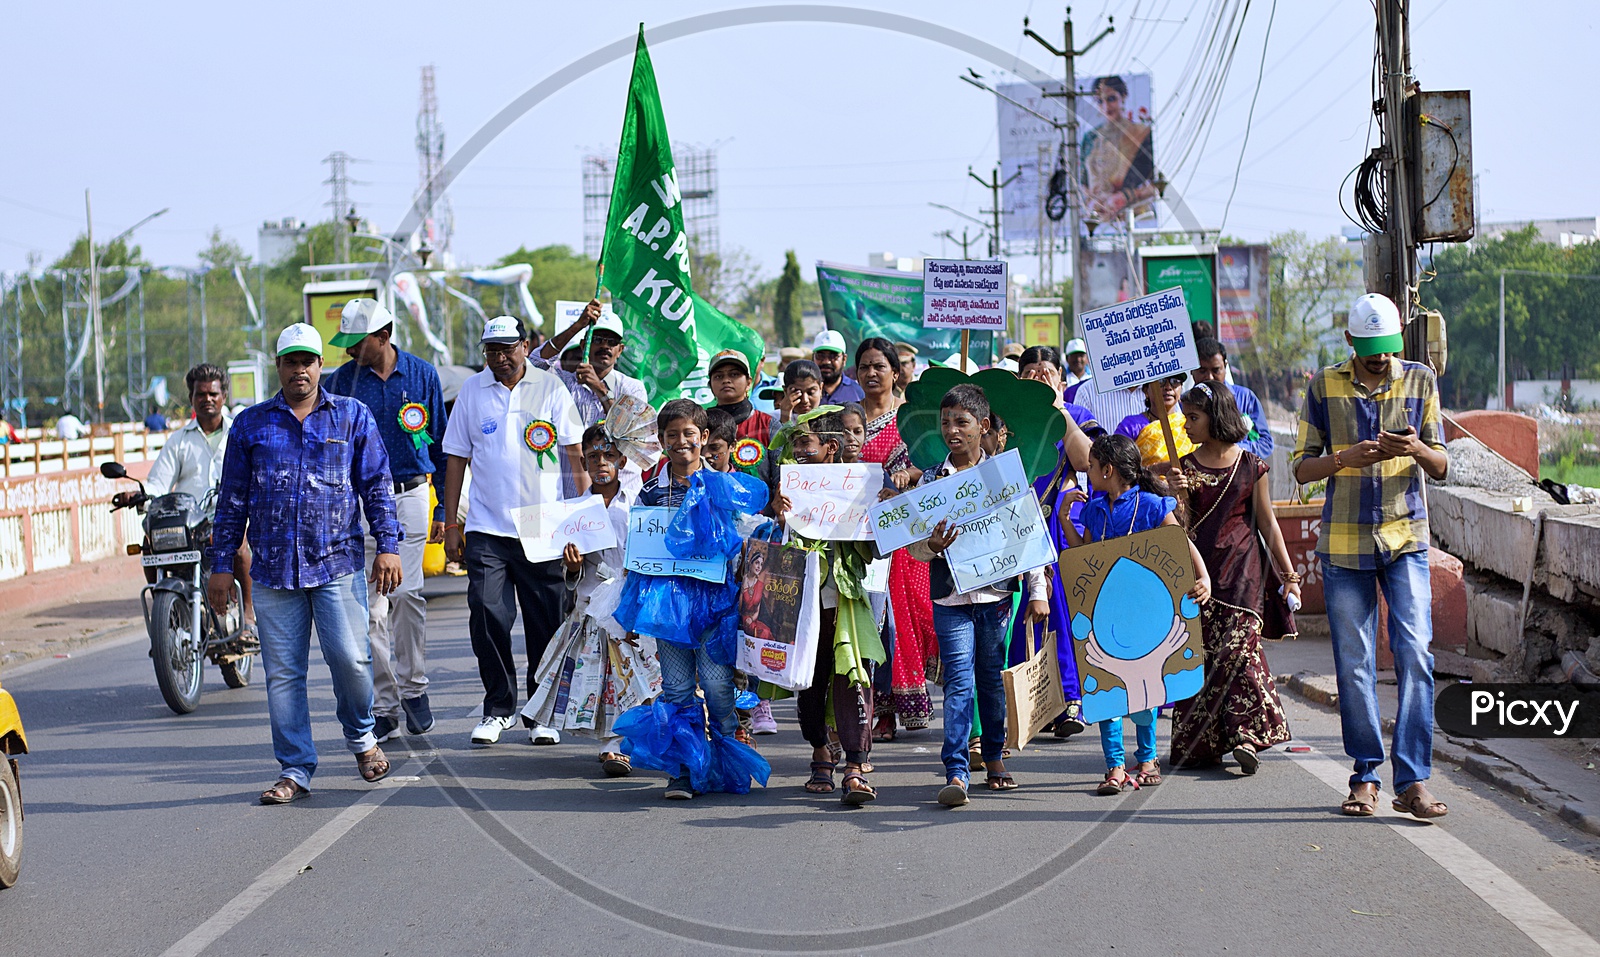 School kids doing protest on Environmental day.